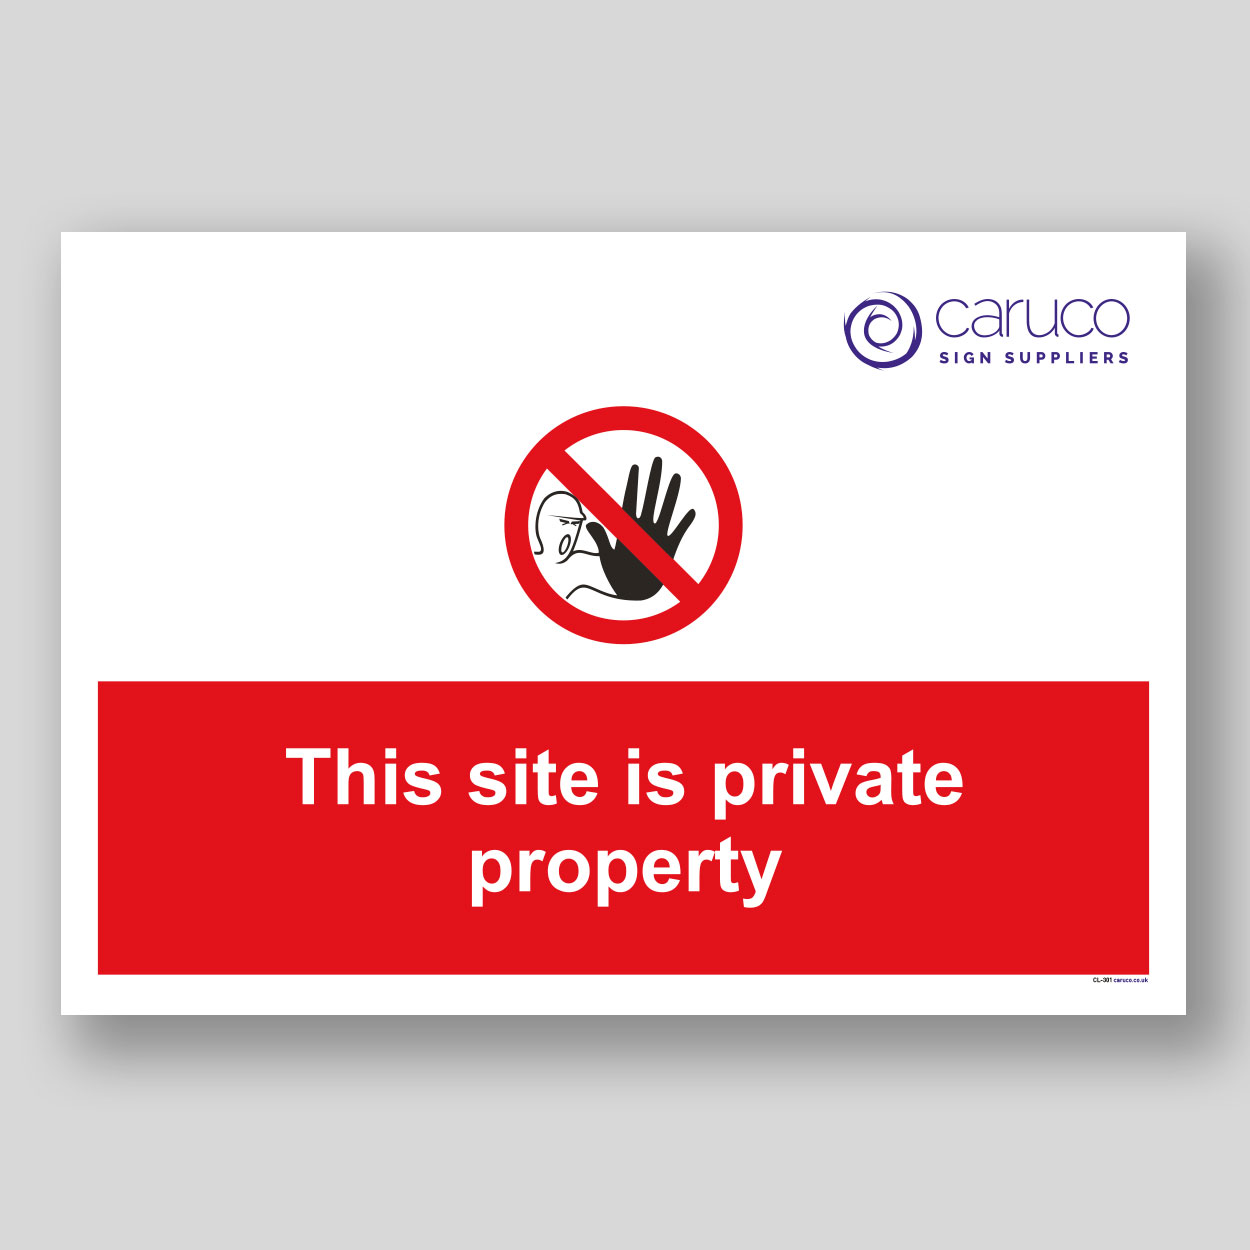 CL-301 This site is private property